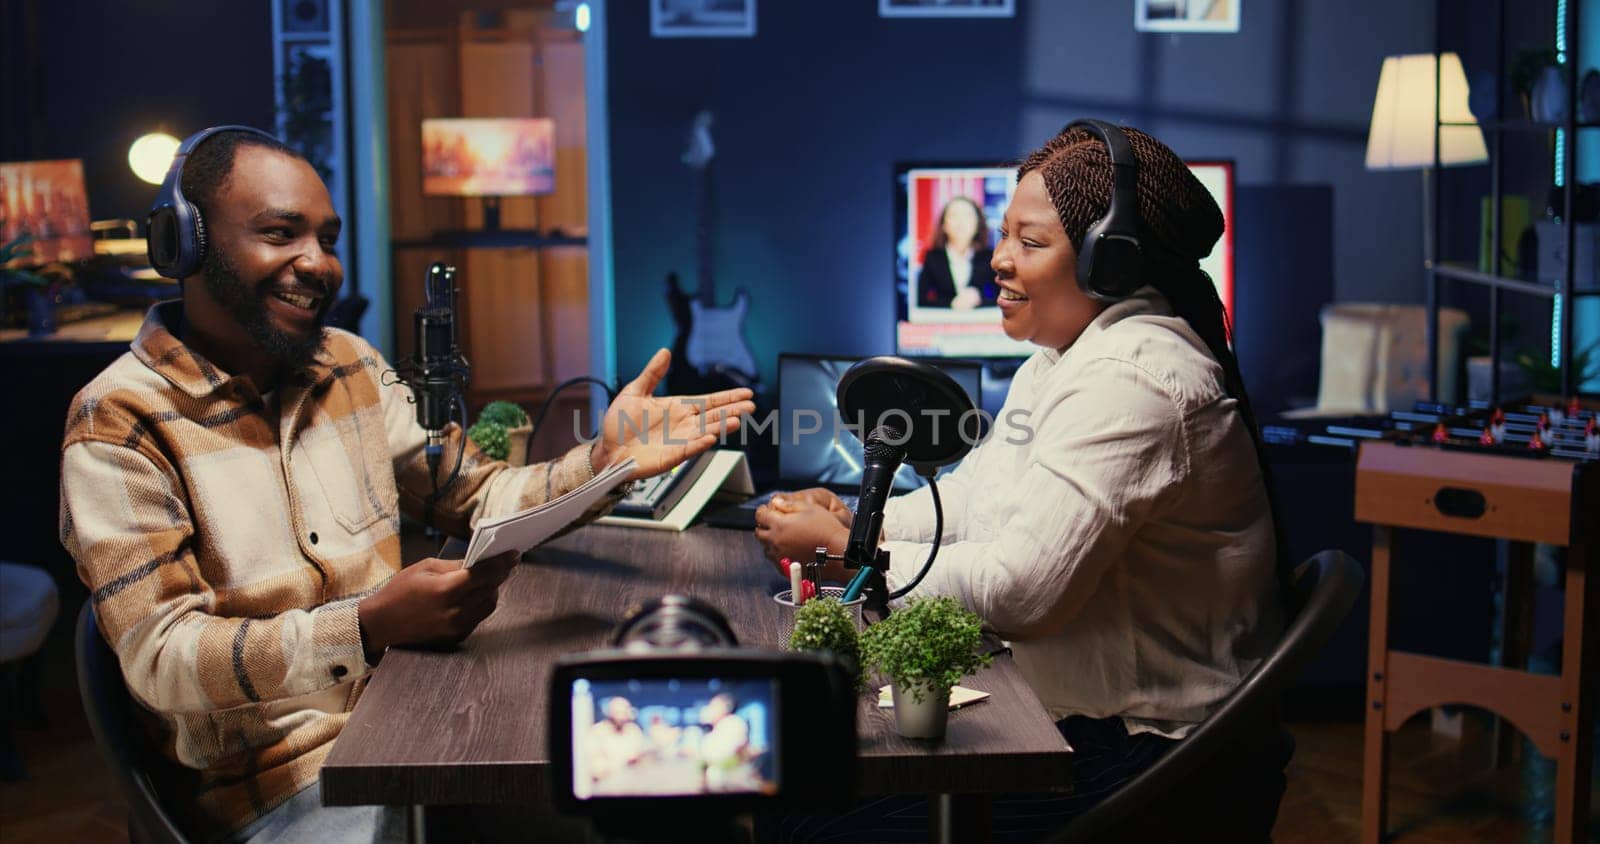 Cohosts streaming podcast using vlogging camera during live debate on vlog channel, handheld camera shot. Man and woman meeting in studio to film show with professional equipment